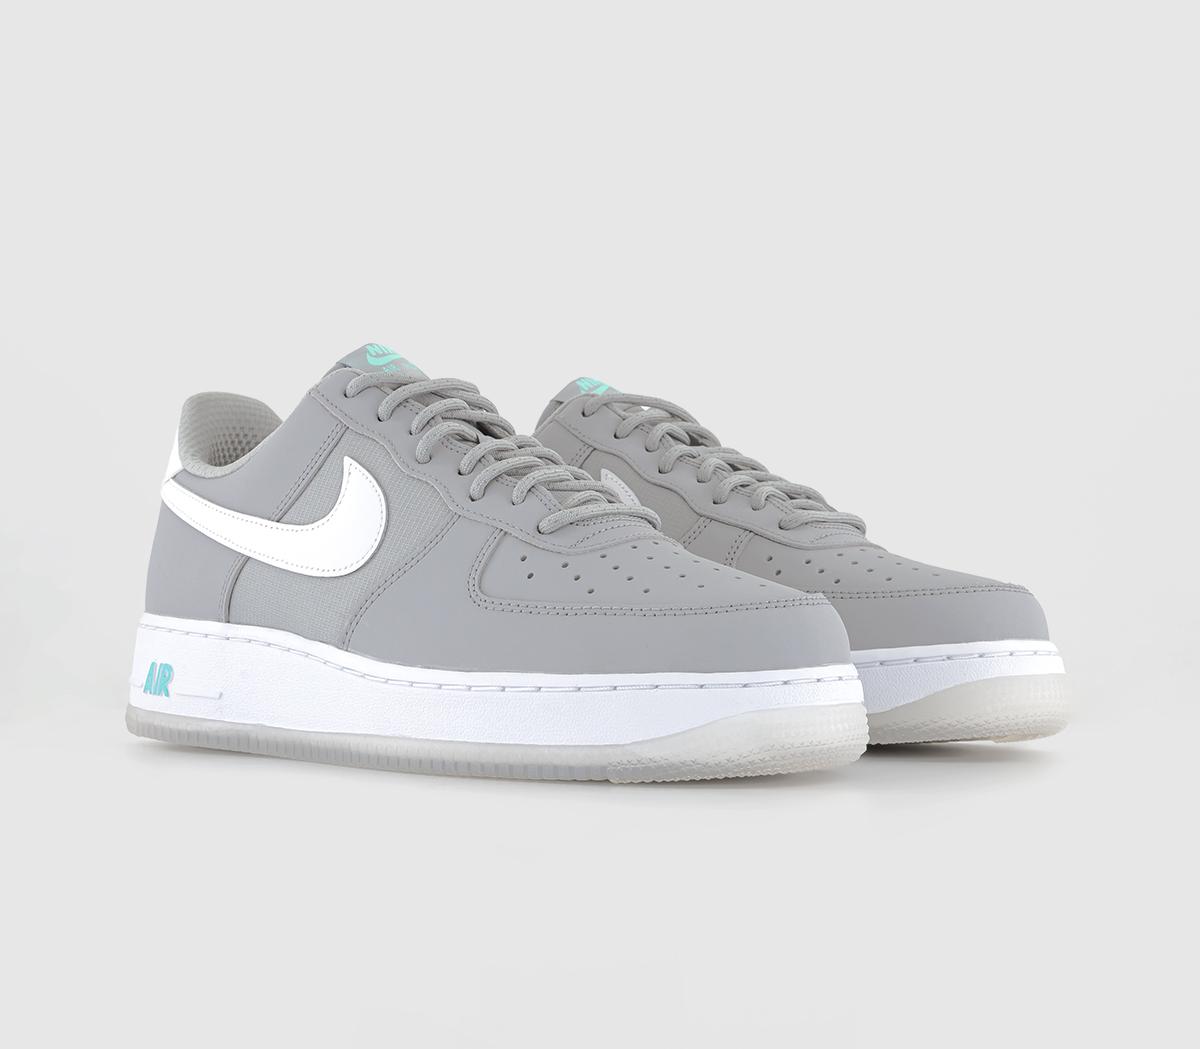 Nike Air Force 1 ’07 Trainers Wolf Grey White Hyper Turquoise, 7